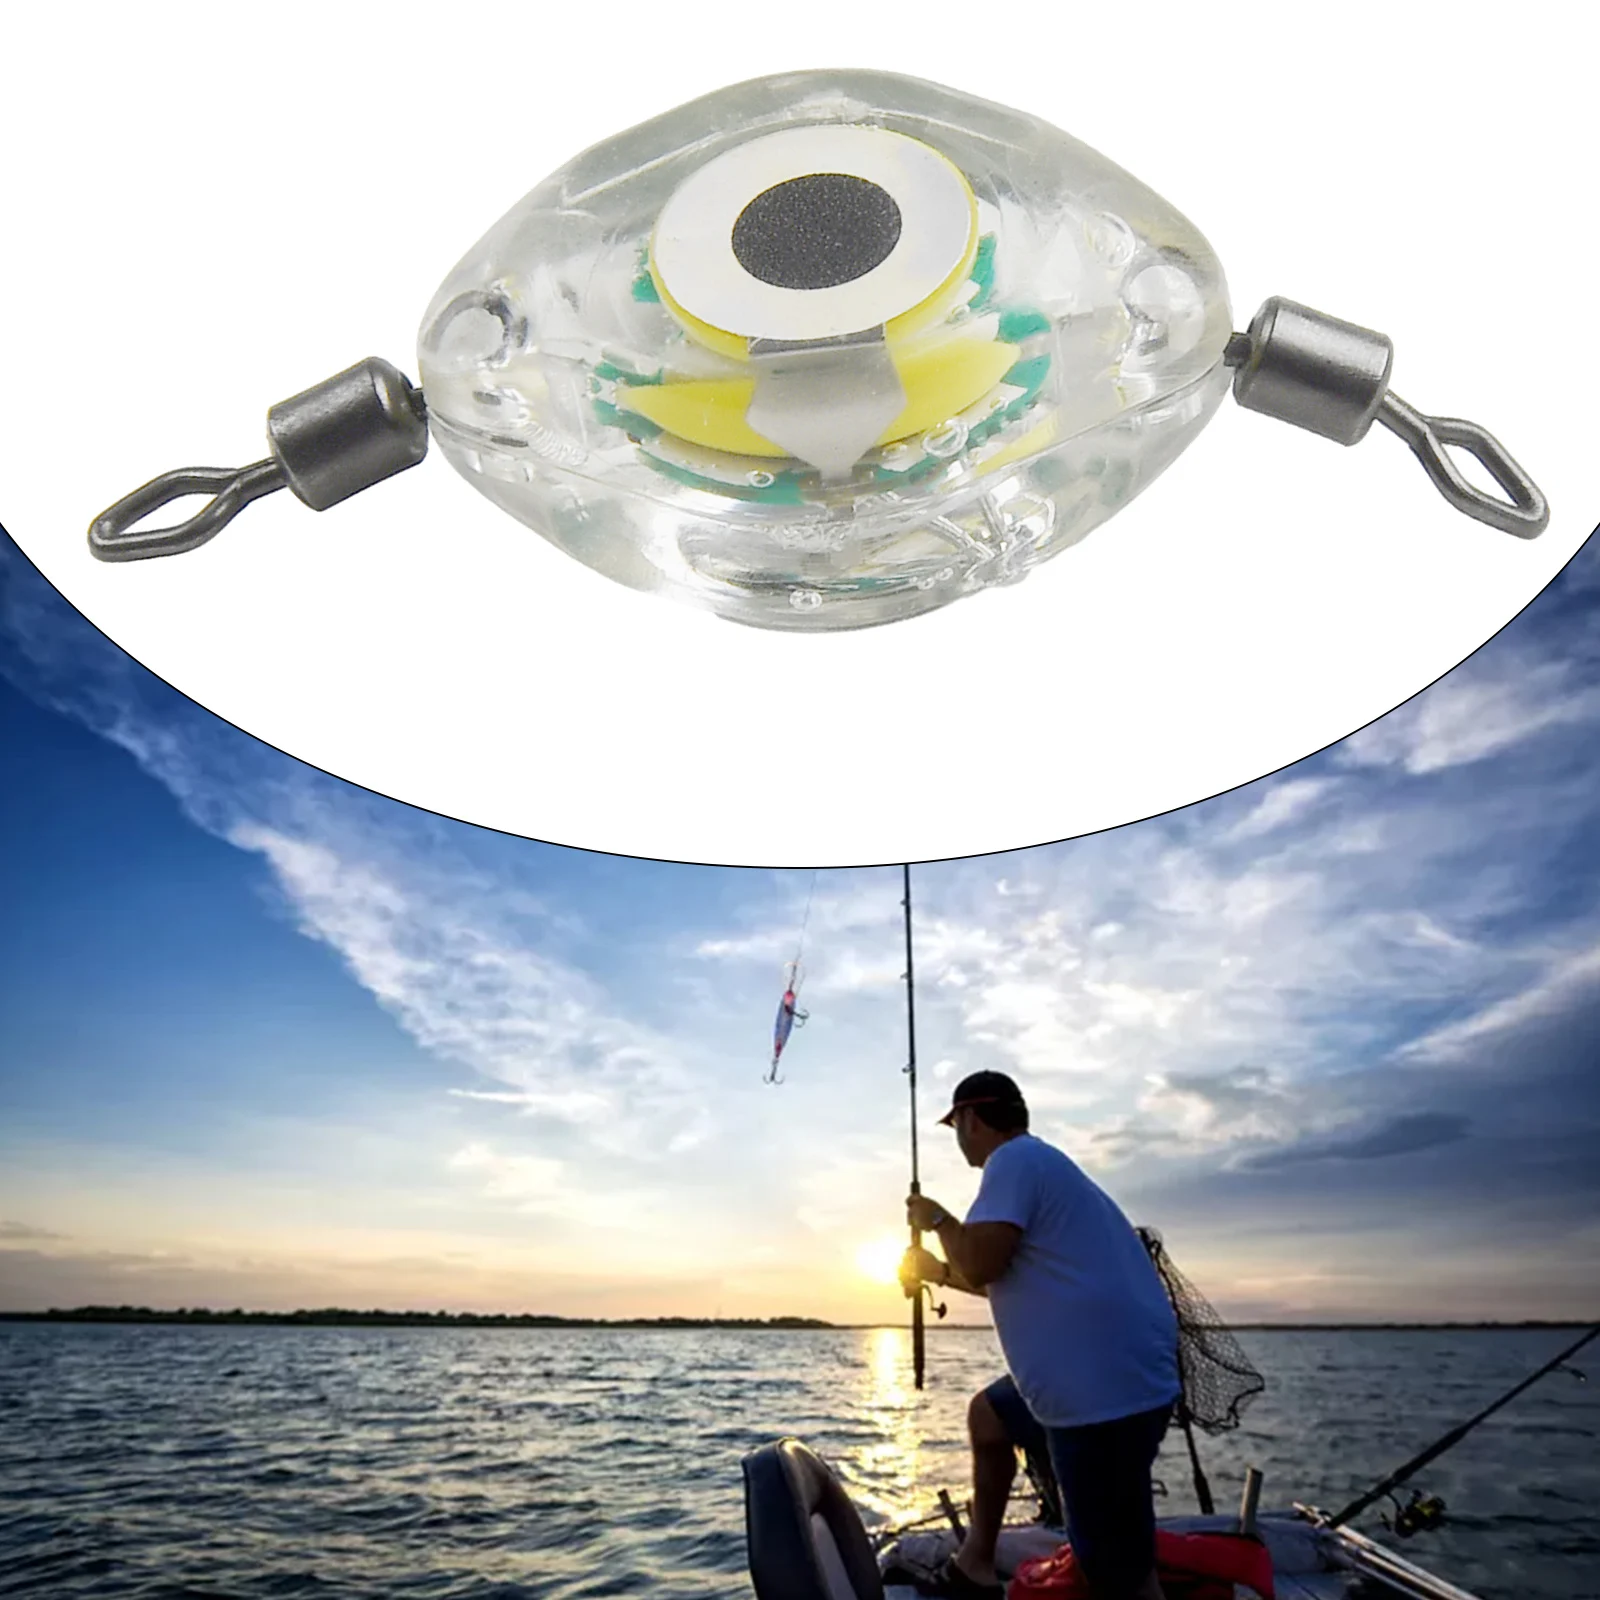 

1Pcs Fishing Lure Light LED Underwater Flash Lure Lamp For Attracting Fish Multicolored Fishing Tool Parts Fitings 4.5 X 1.5cm